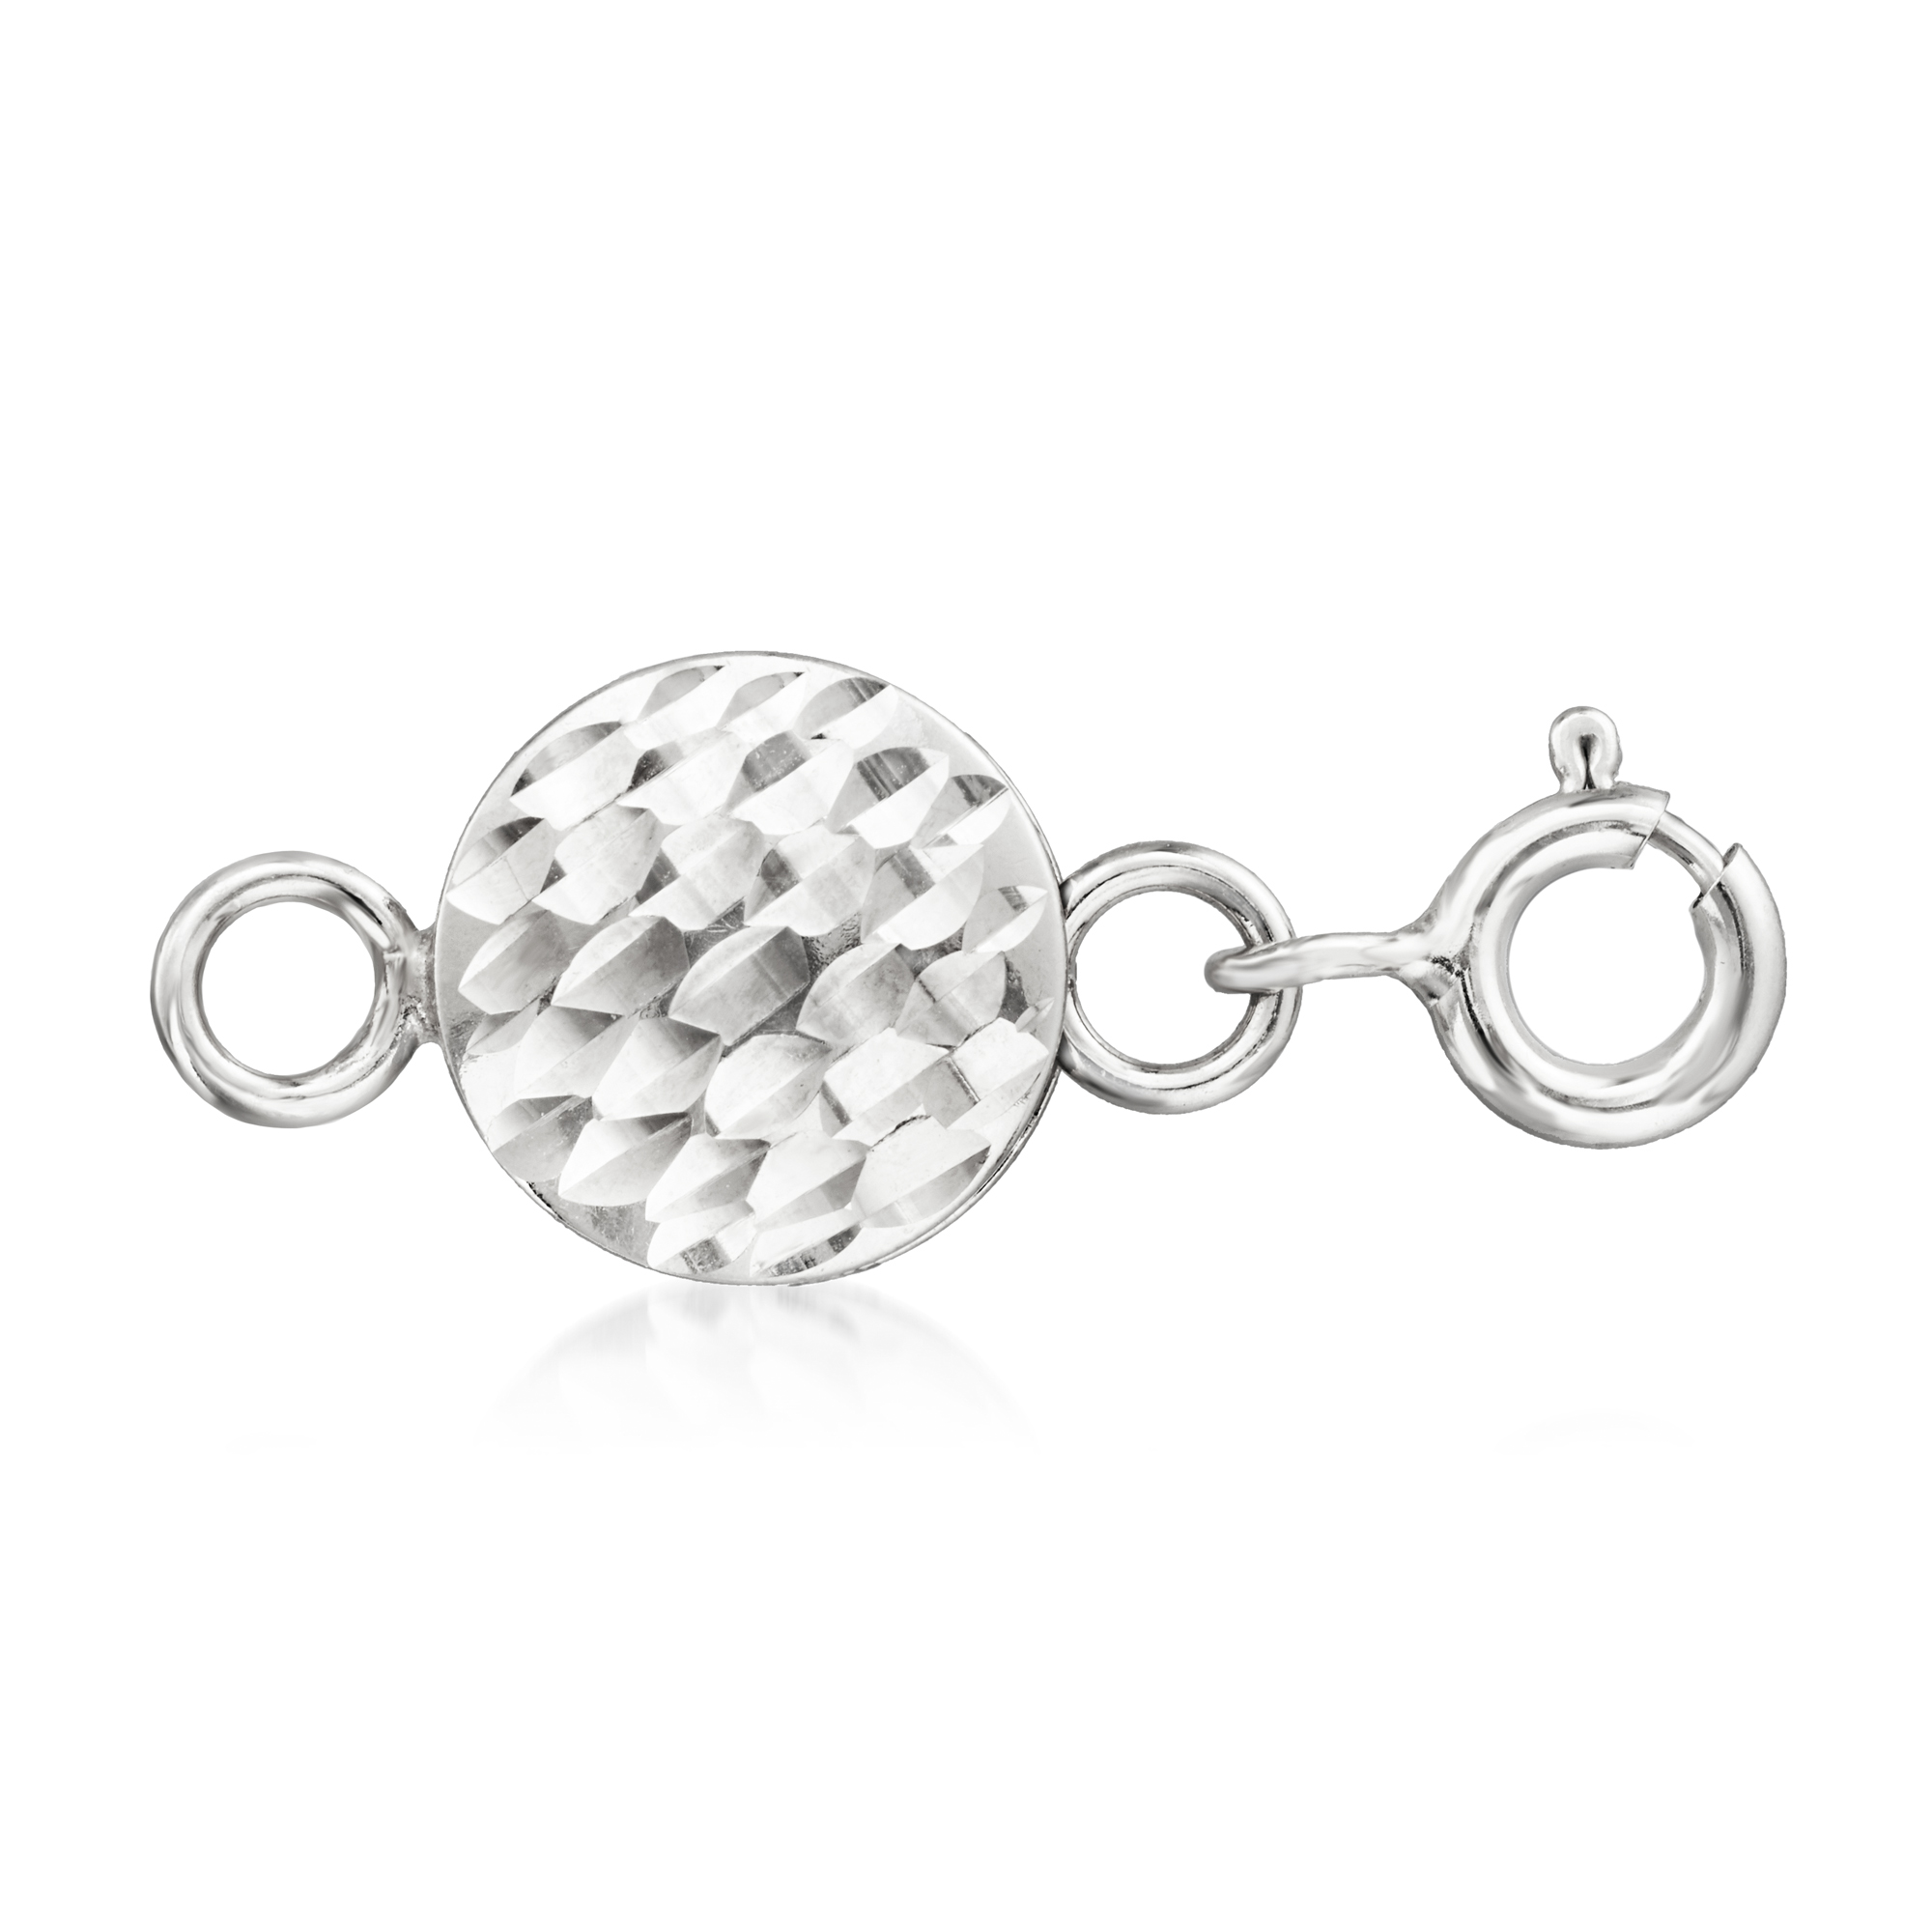 Ross-Simons Italian Sterling Silver Diamond-Cut Magnetic Clasp Converter, Women's, Adult - image 1 of 4